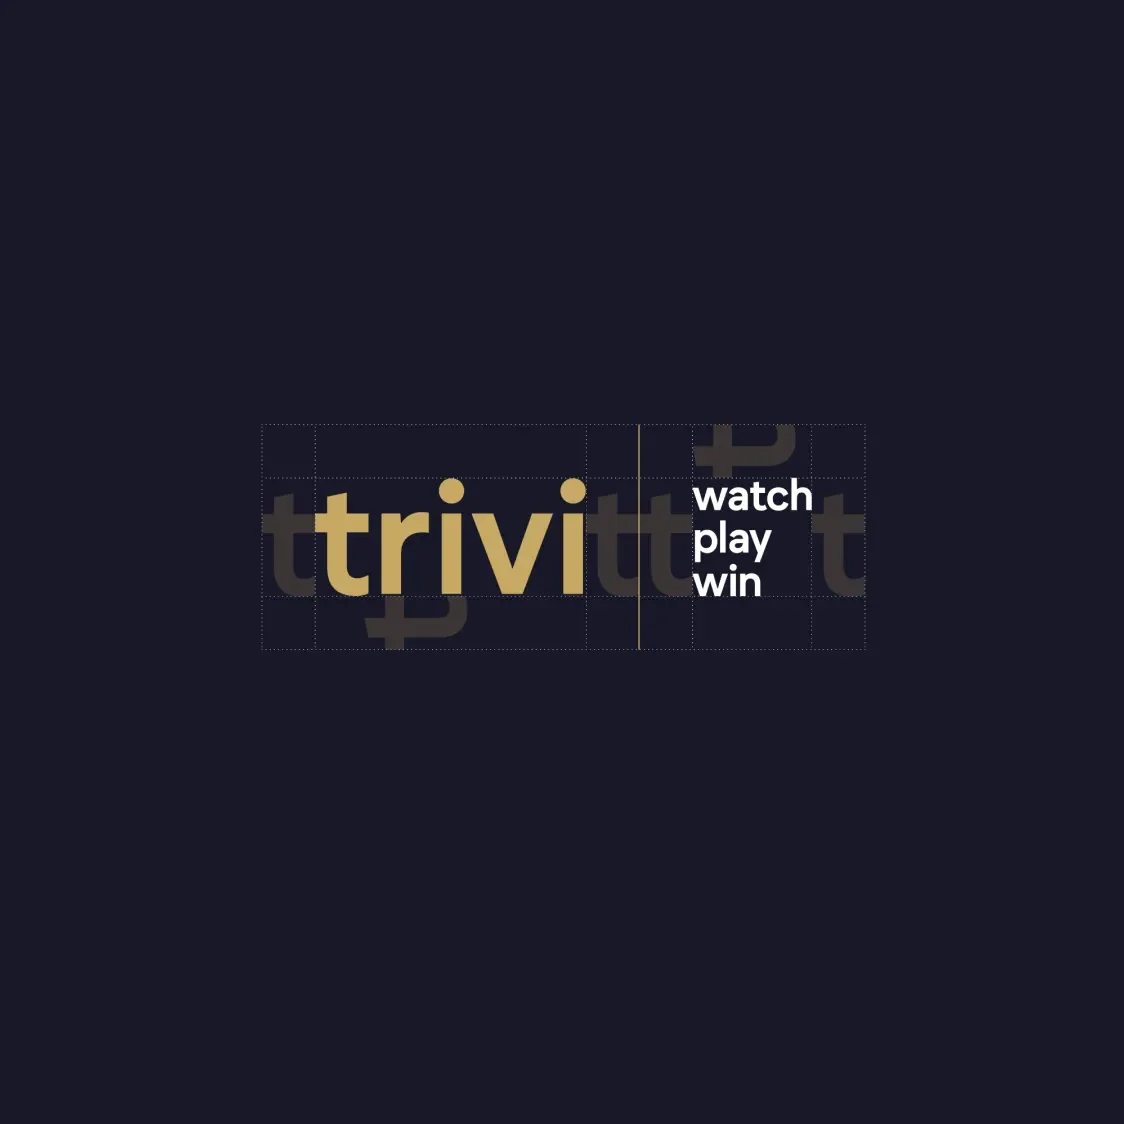 construction and spacing of the Trivi logo